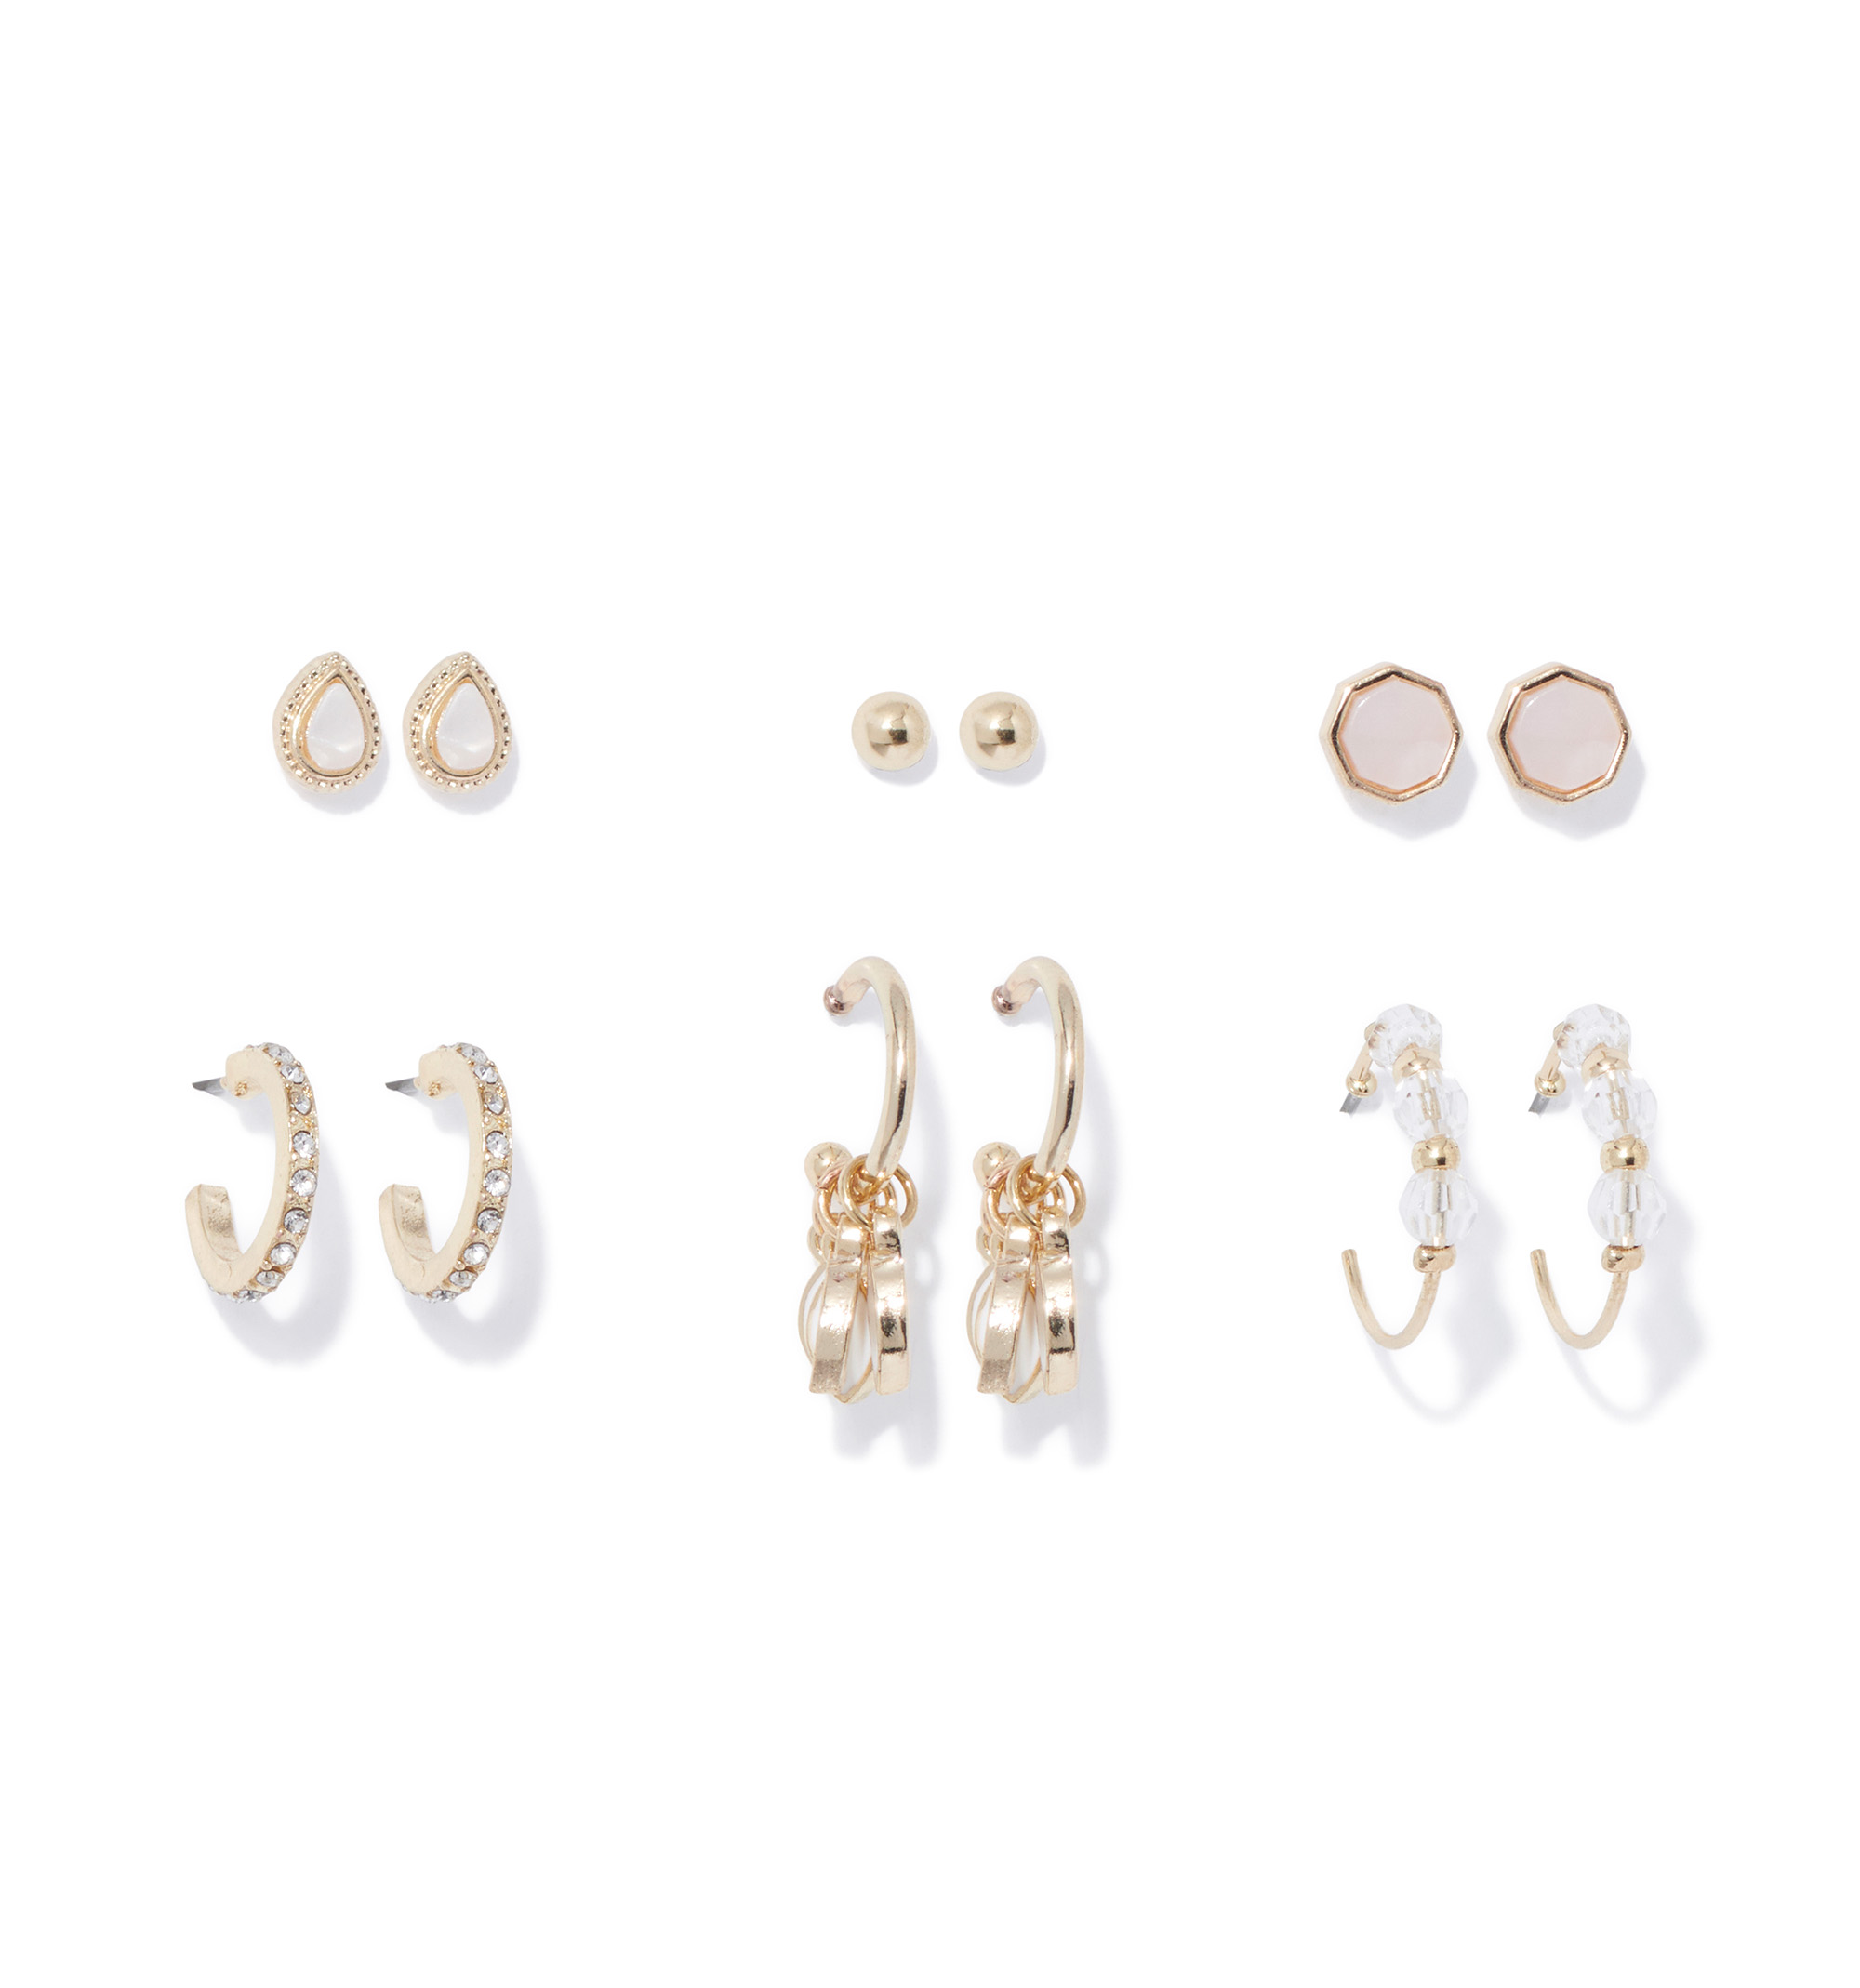 Vembley Combo Of 12 Pair Silver and Gold Studded Pearl Stud Earrings For  Women and Girls at Rs 100/set | Earrings in New Delhi | ID: 25189730091